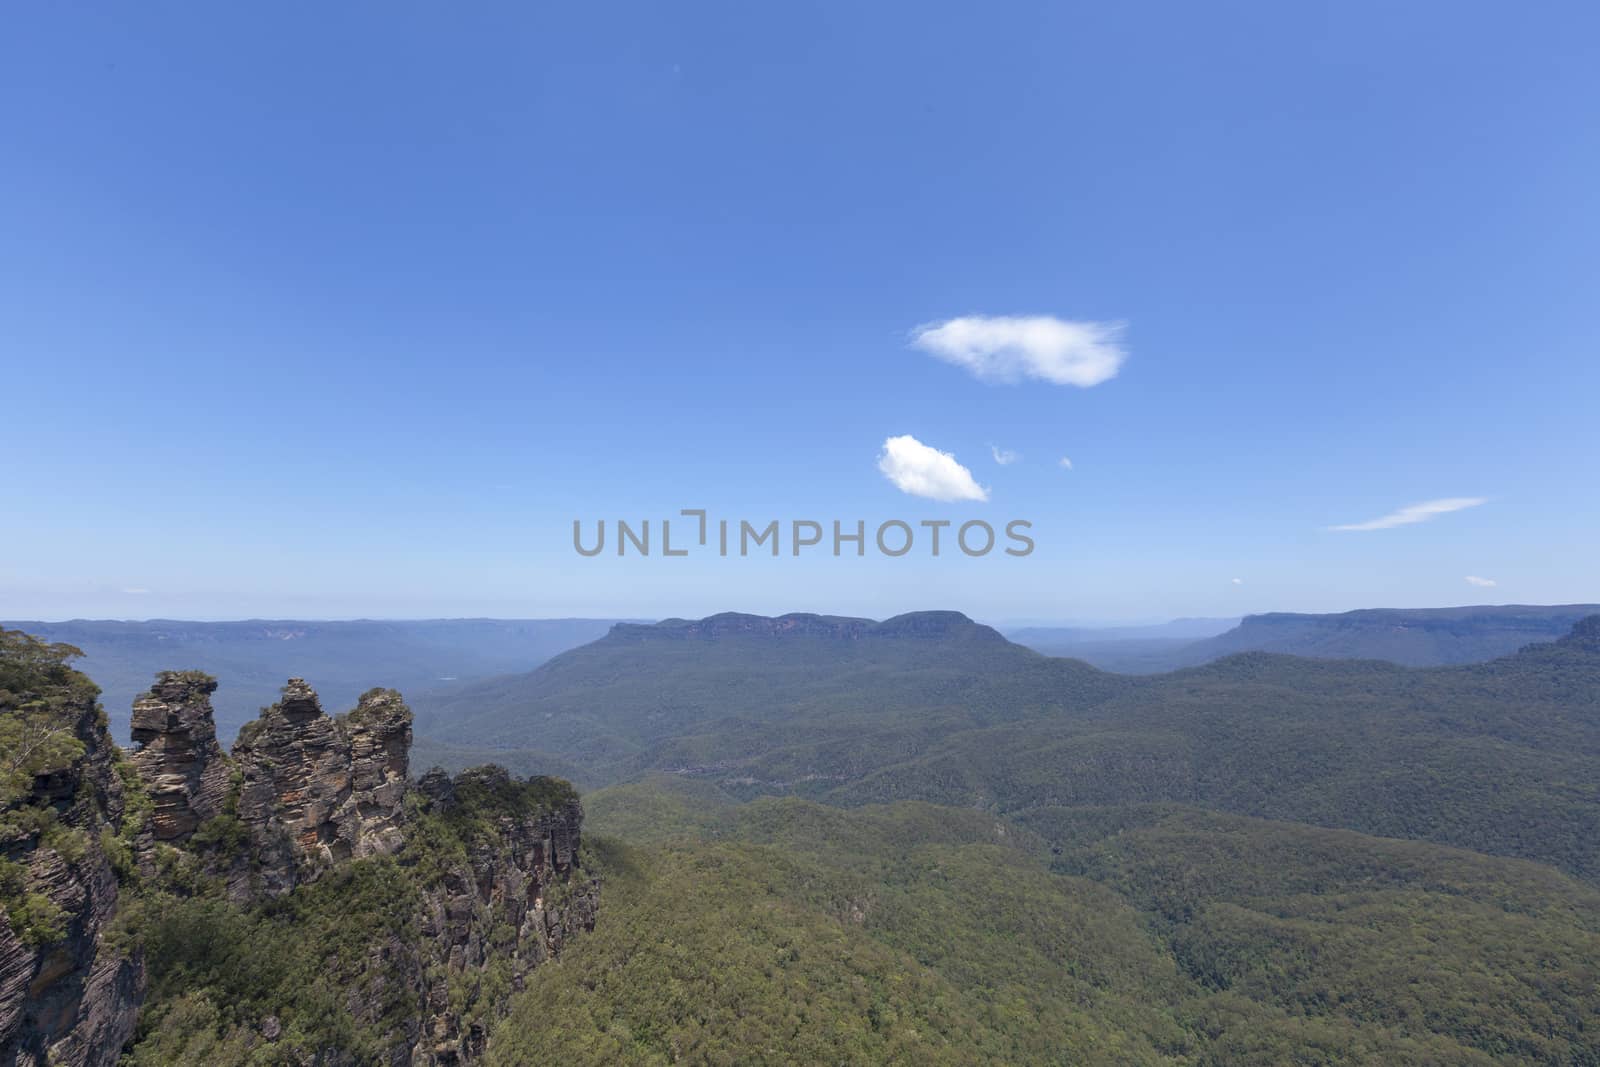 Blue Mountains National Park is a national park in New South Wales, Australia